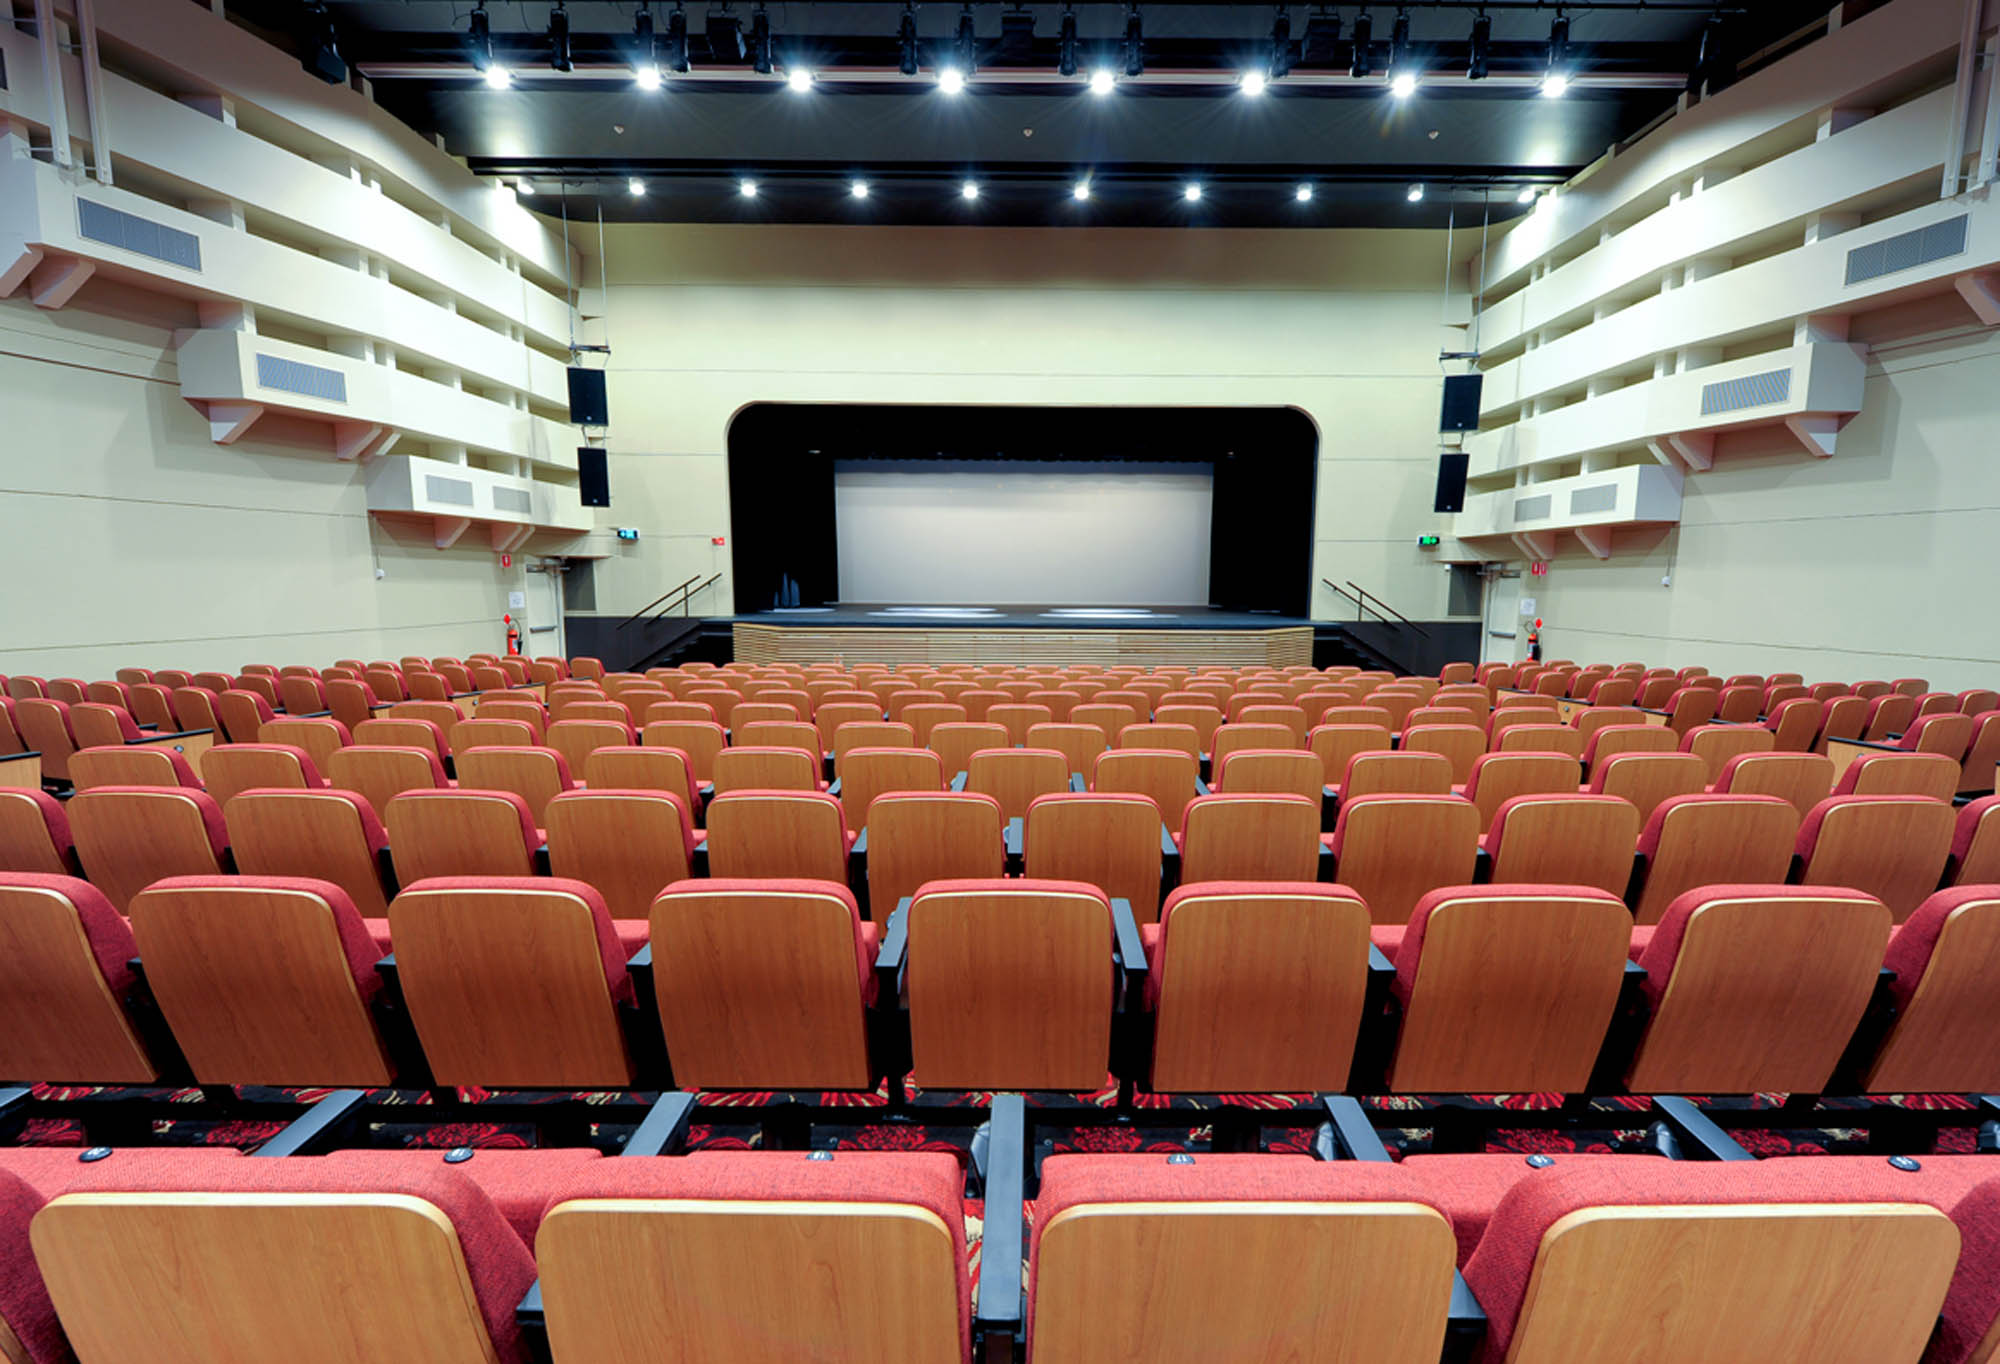 griffith duncan theatre education interior nsw university seats lighting stage lighting stage seats